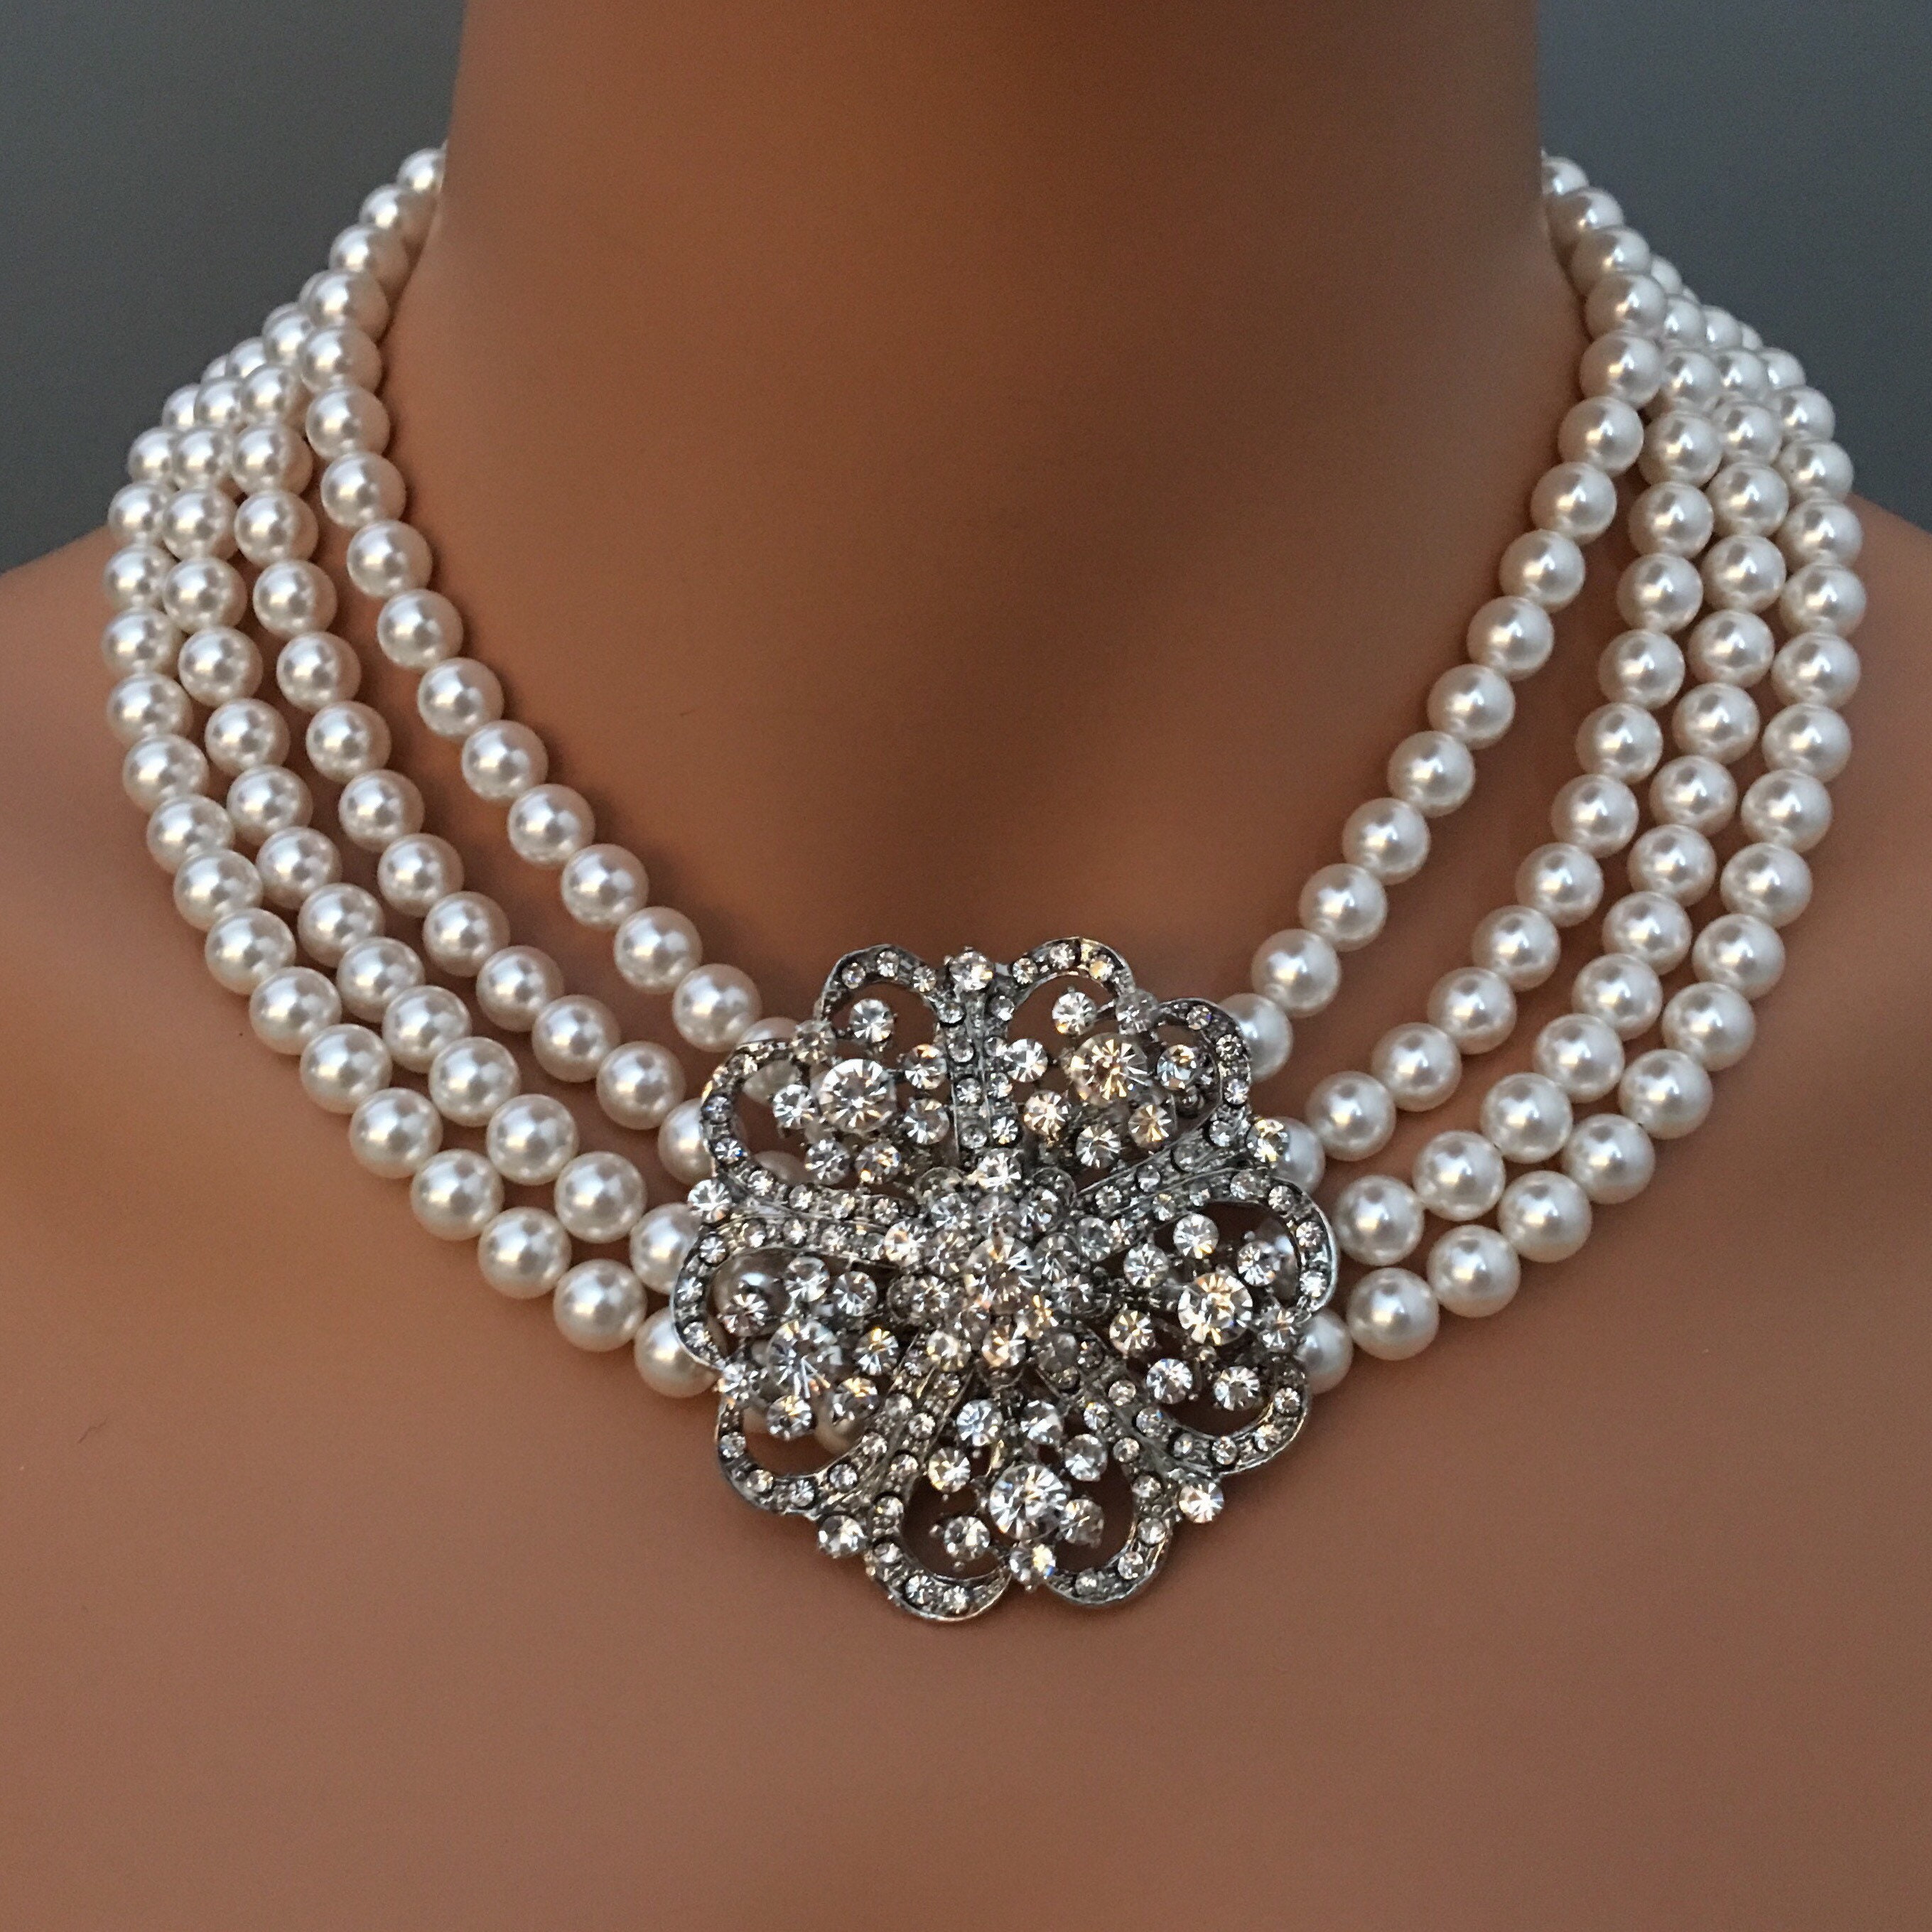 Audrey Hepburn Breakfast At Tiffany's Pearl Necklace | lupon.gov.ph